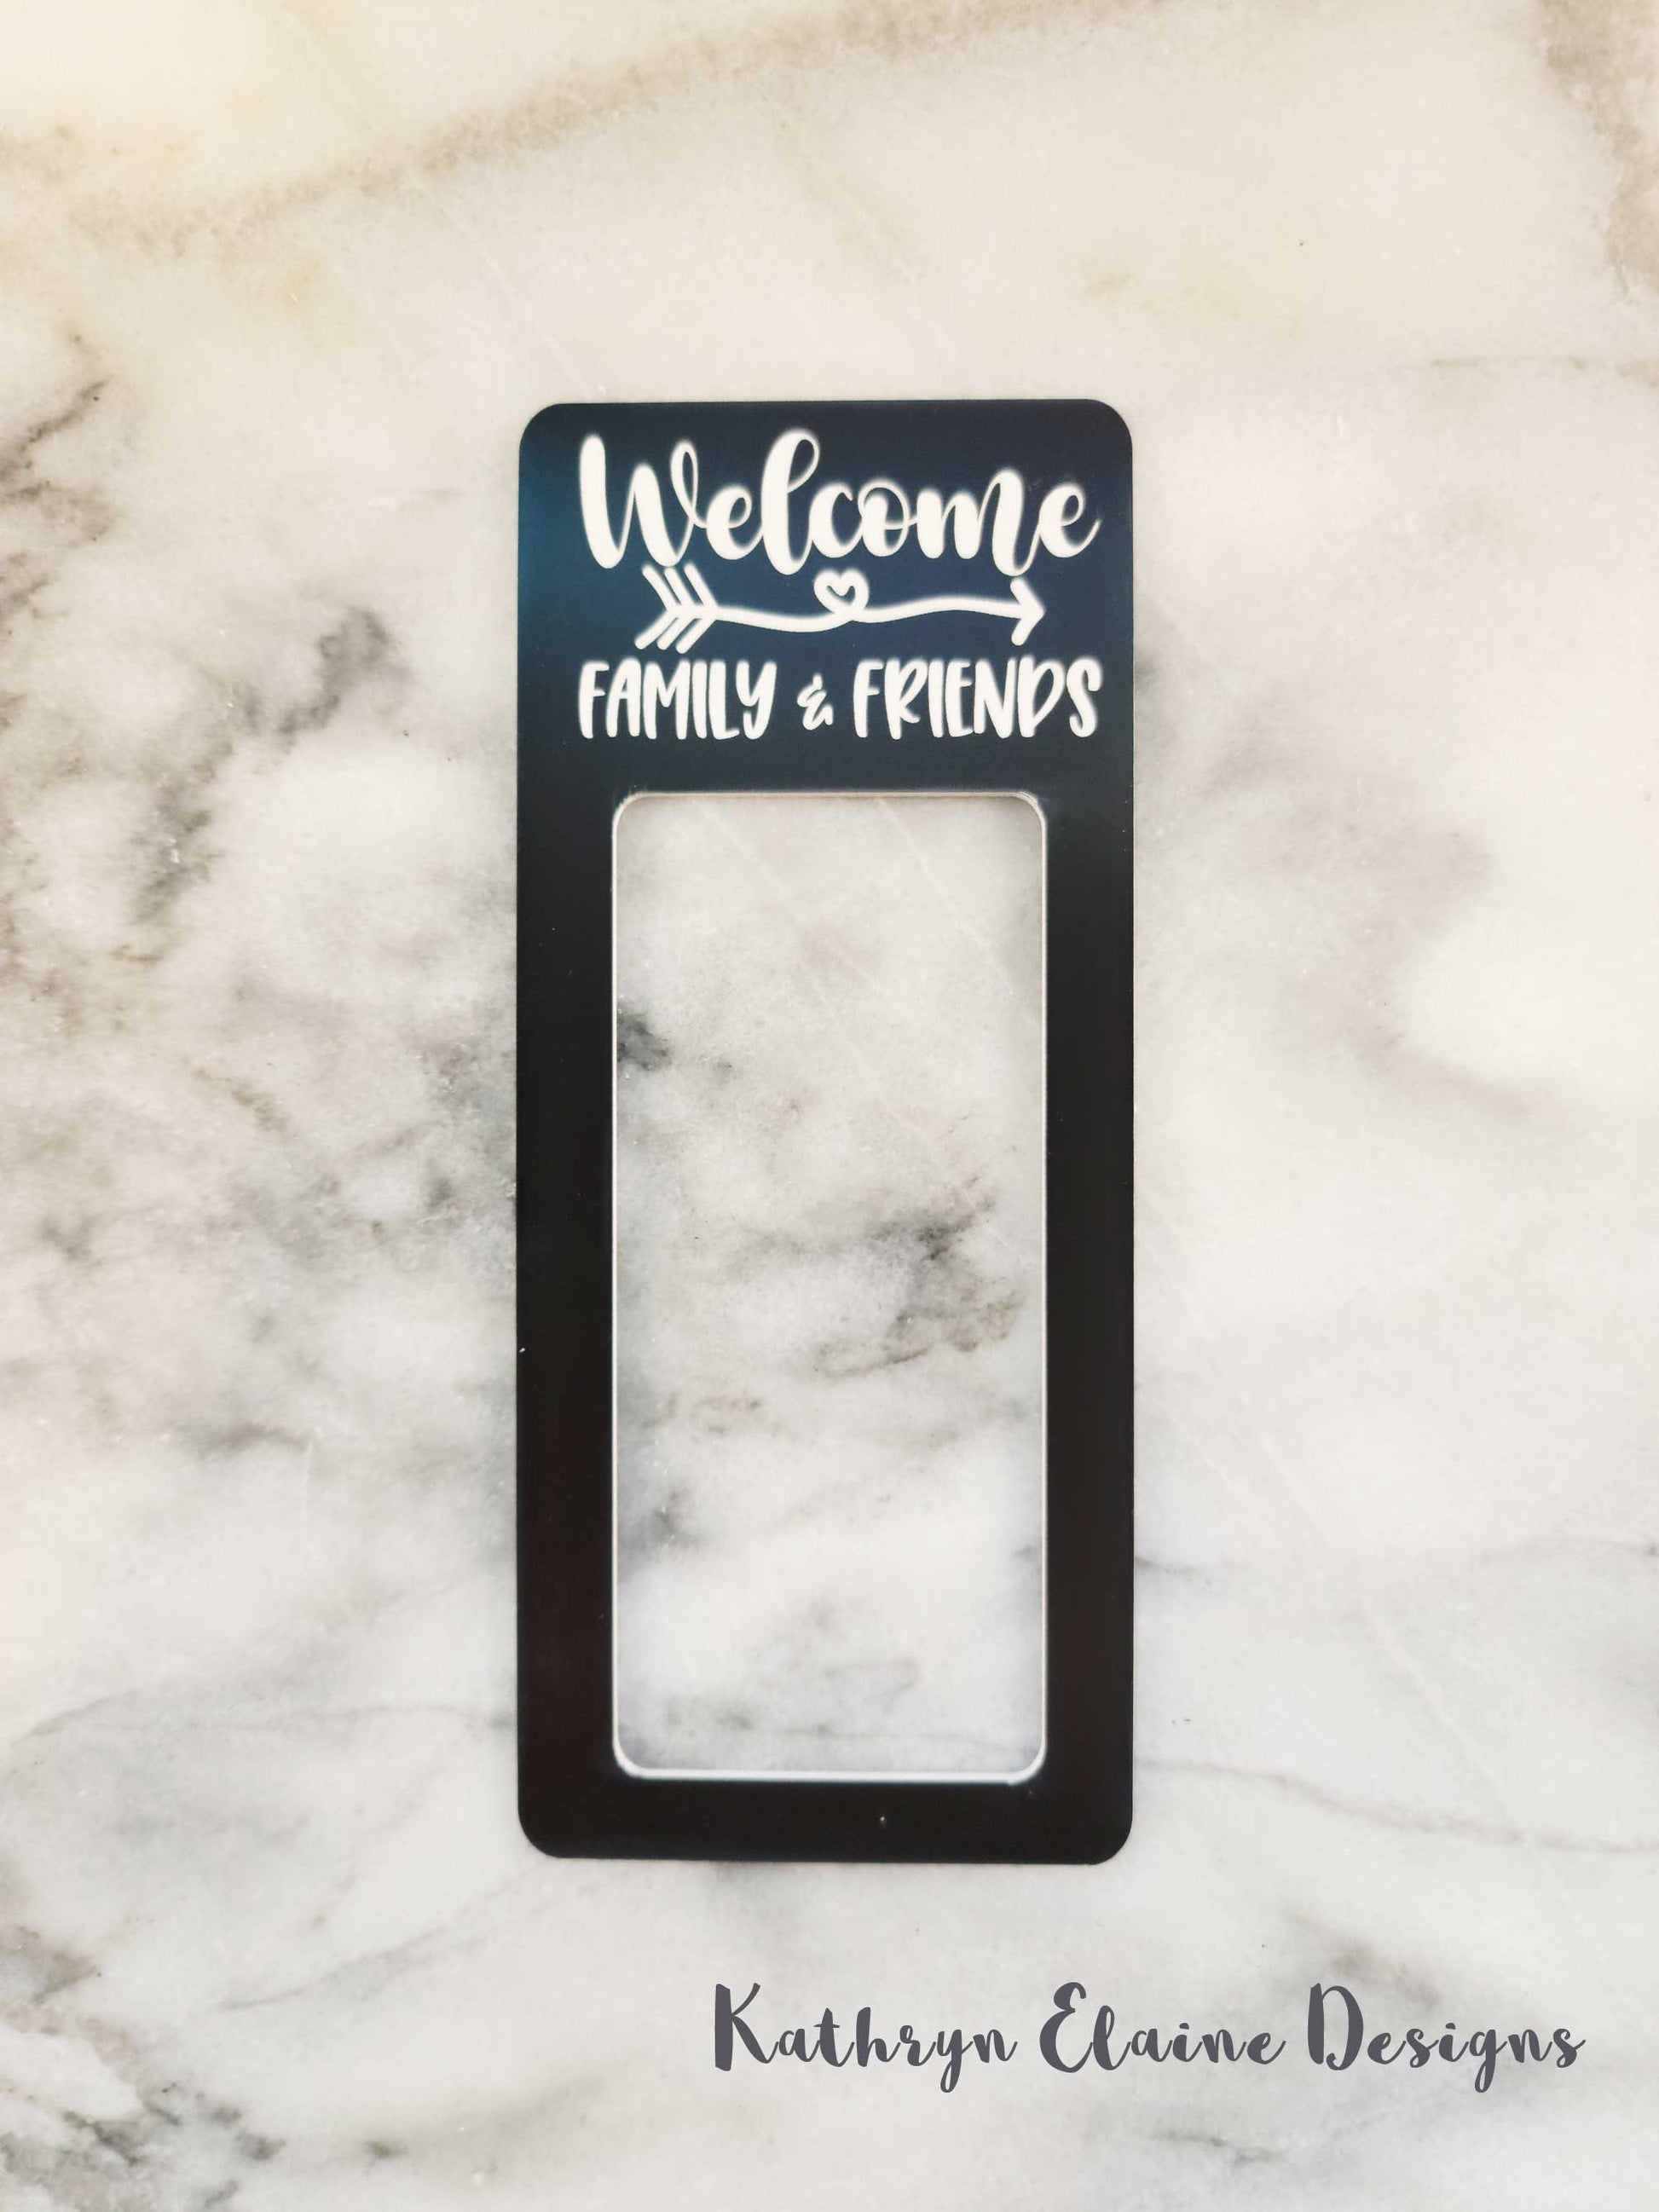 Black laminate doorbell surround with white lettering stating Welcome arrow design family and friends around on marble background